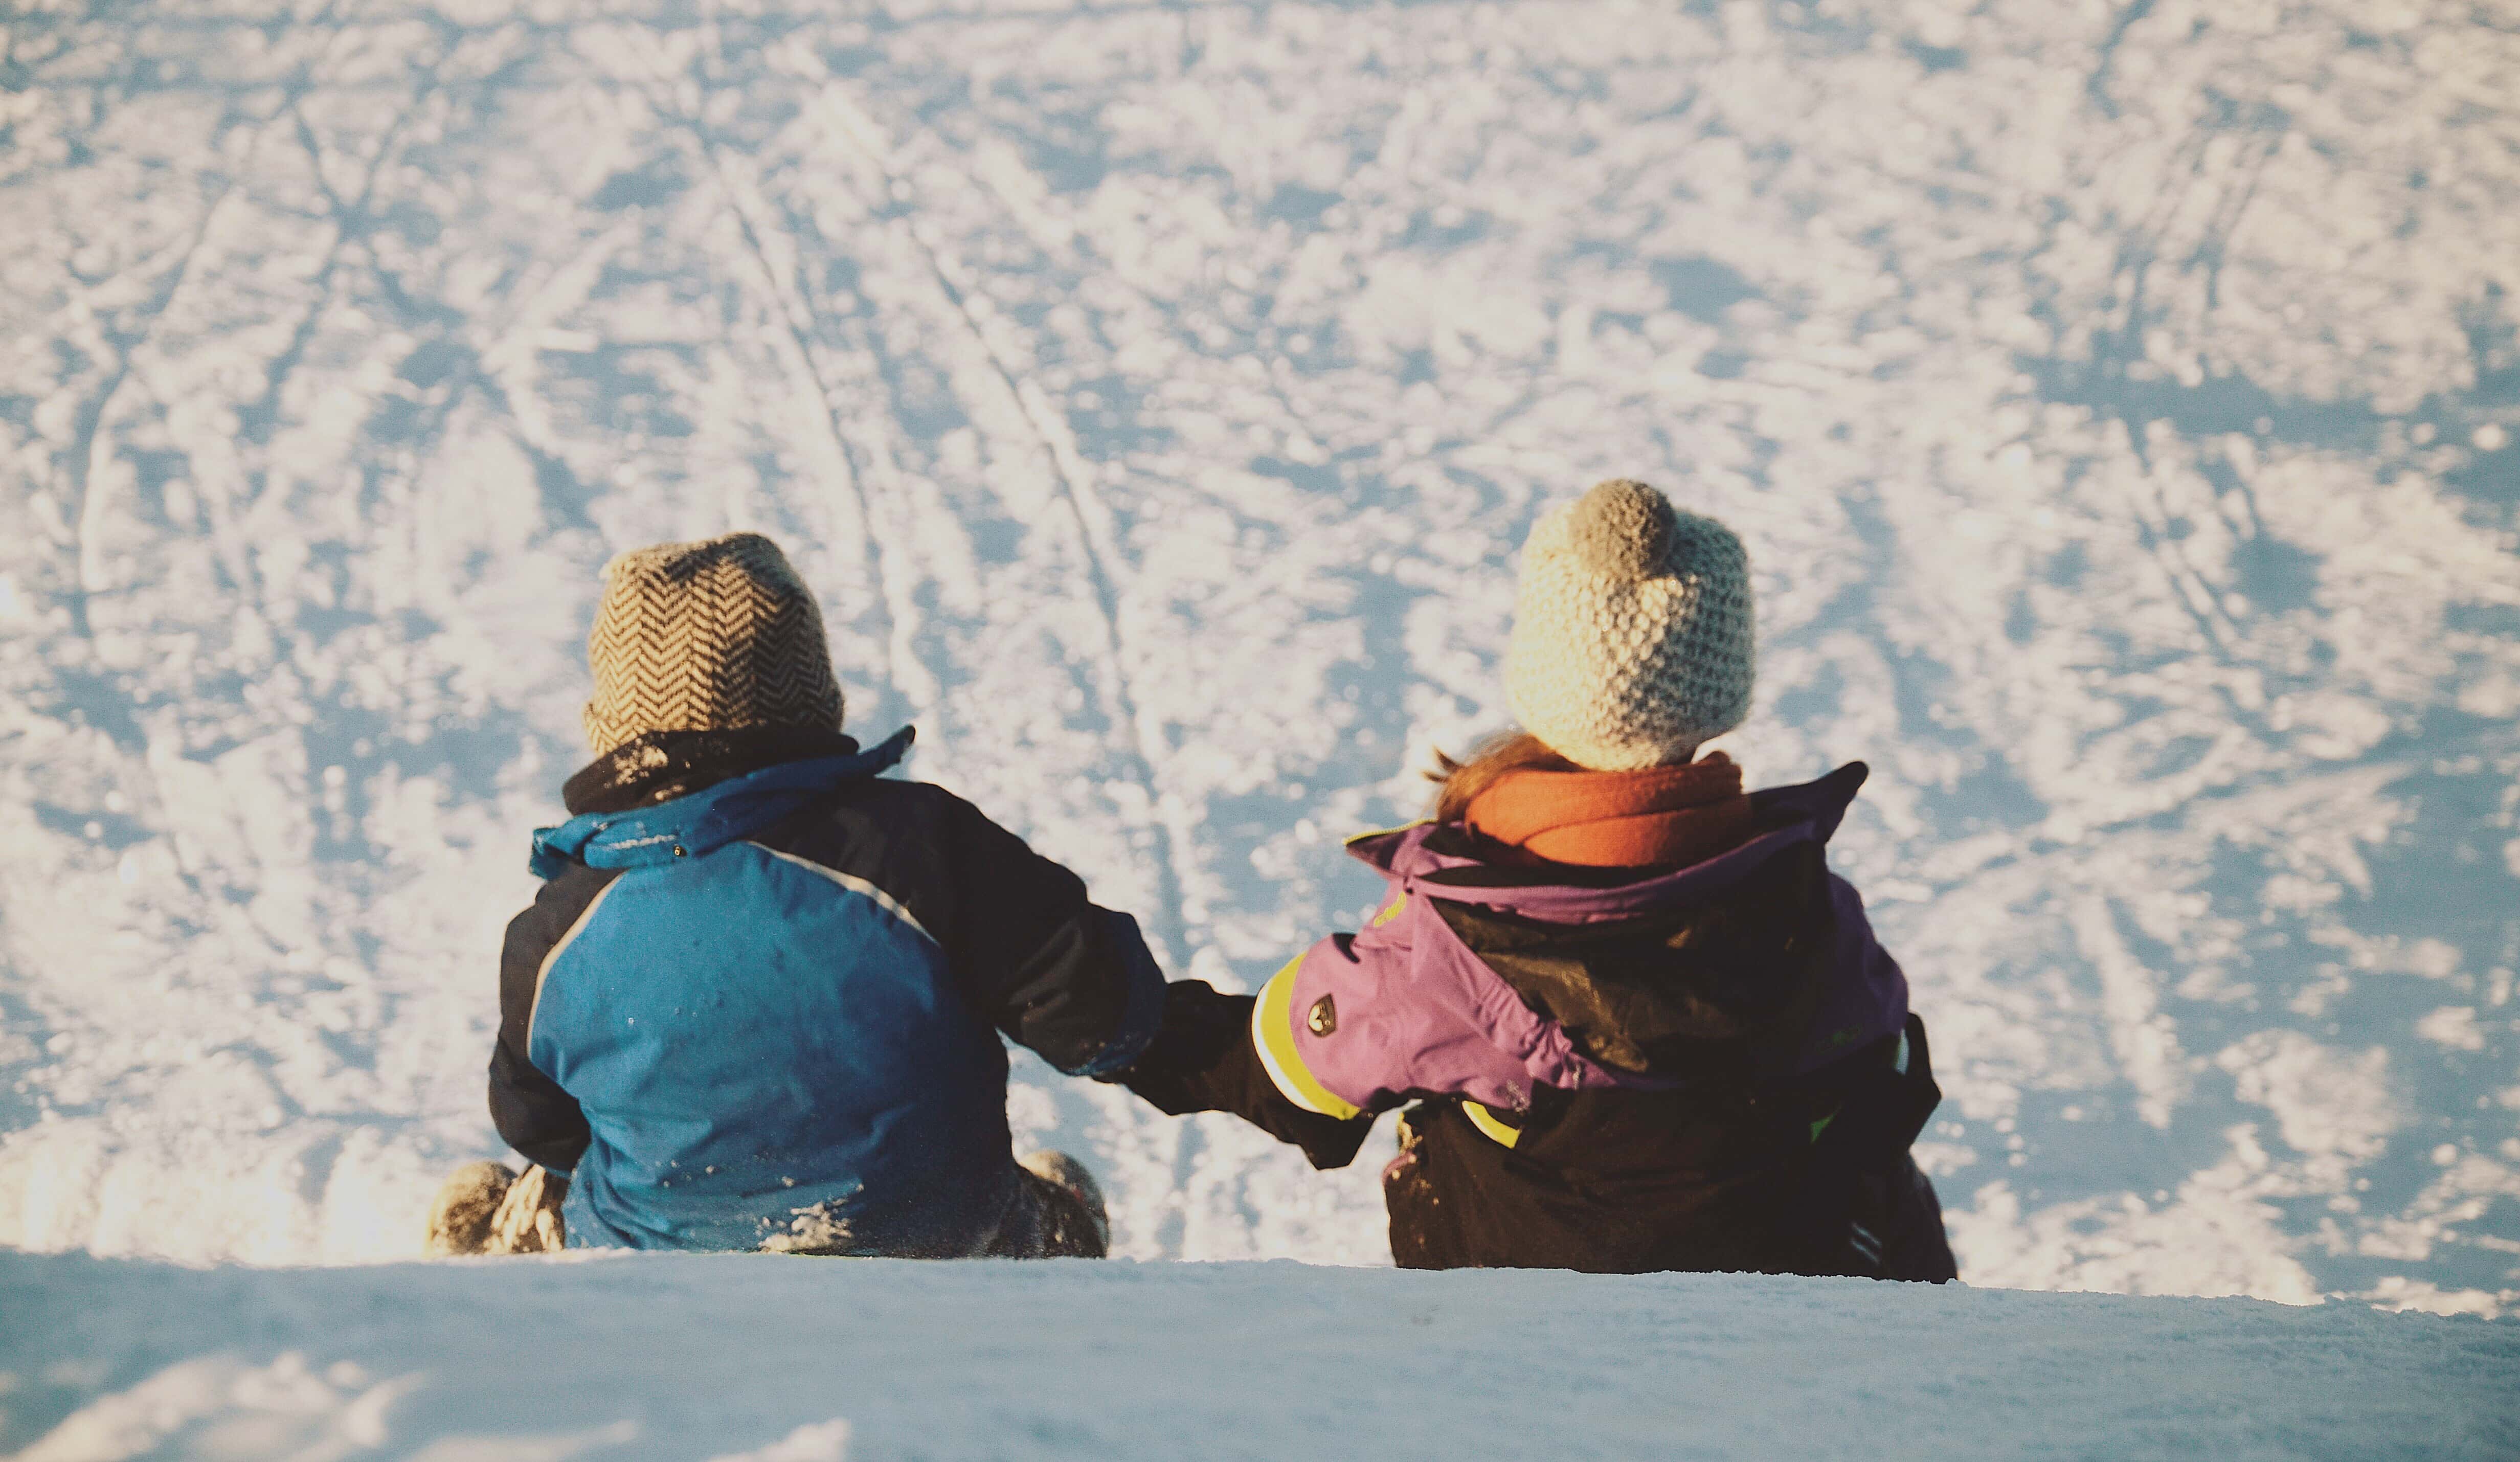 Tobogganing, Injury, and Liability: What Happens if You Get Hurt Sledding? feature image